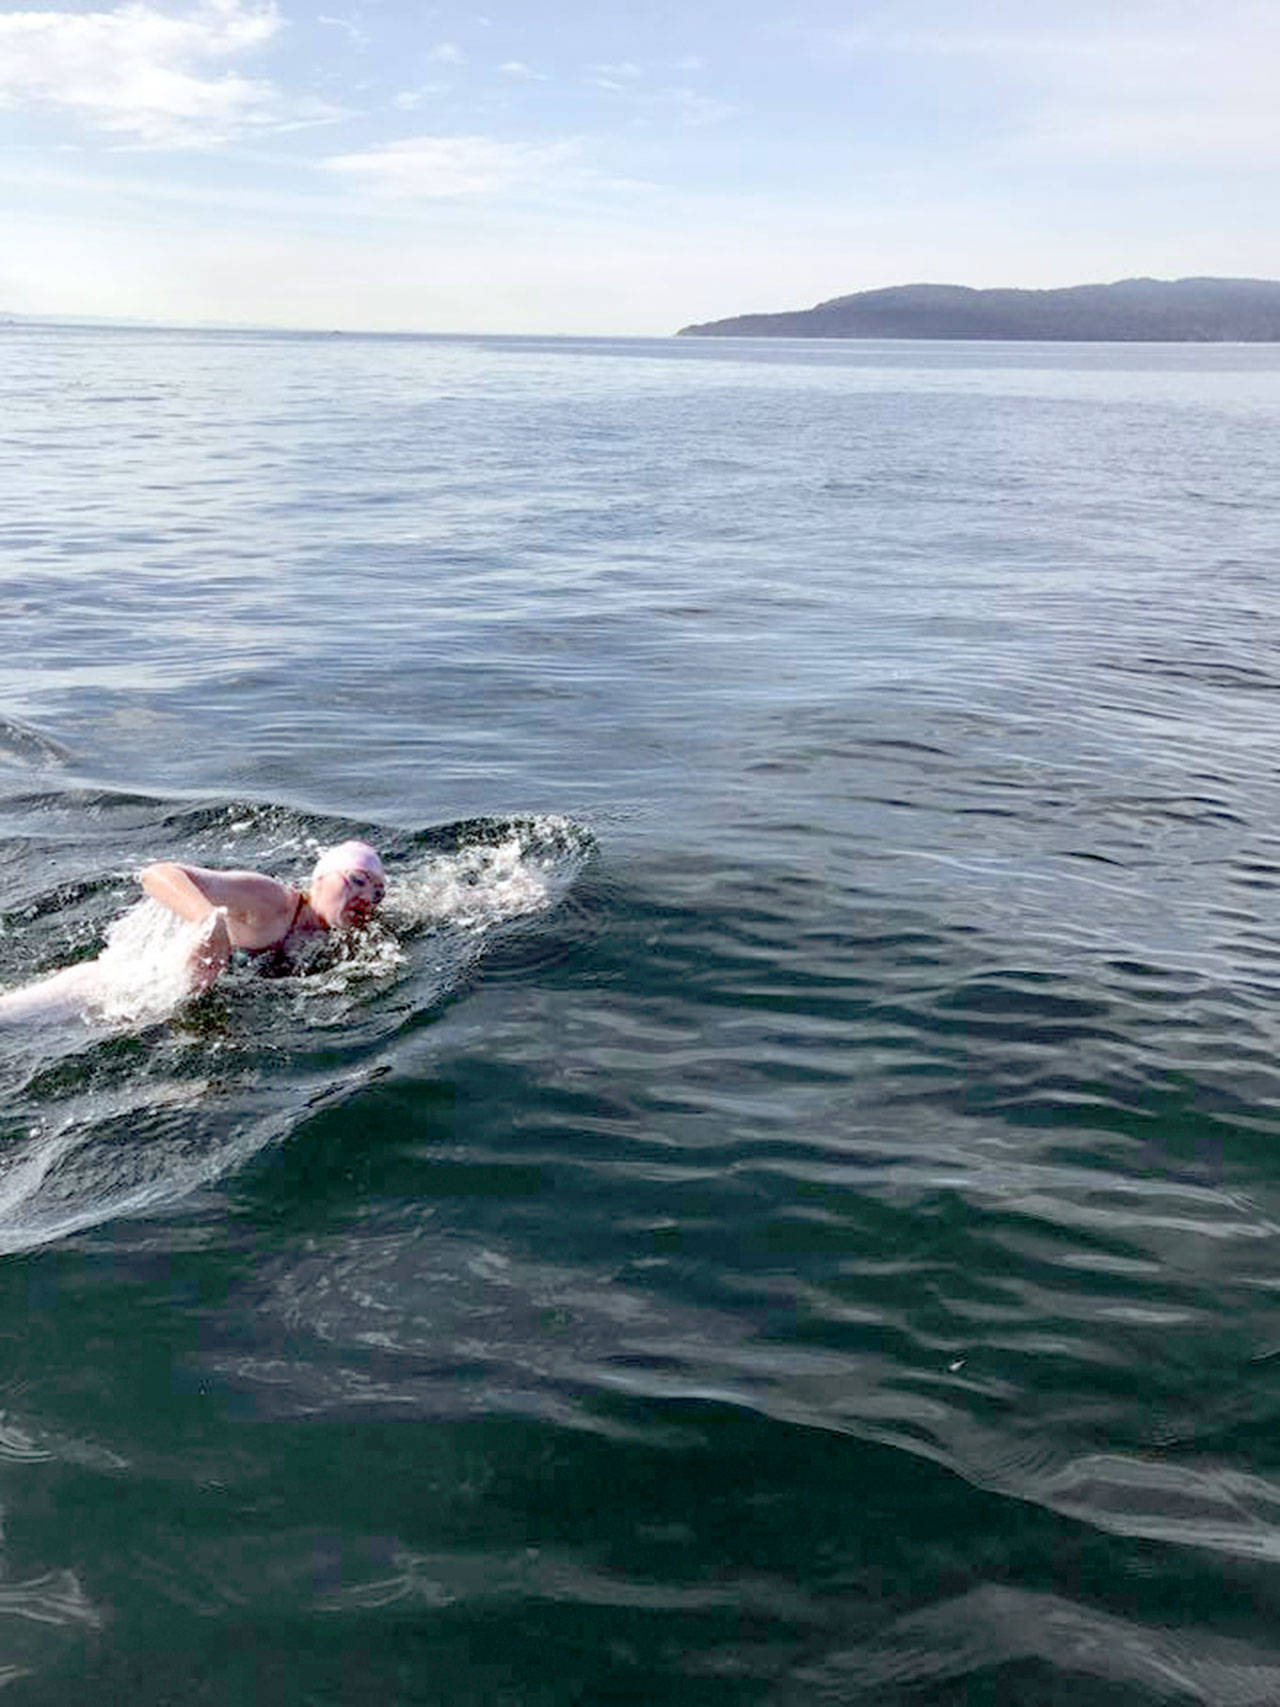 Swimmer Melissa Blaustein makes her way to the Race Rocks area west of Victoria, B.C. around 3:30 p.m. Saturday. Blaustein completed her trek across the Strait of Juan de Fuca at 3:43 p.m. (Northwest Open Water Swimming Association)